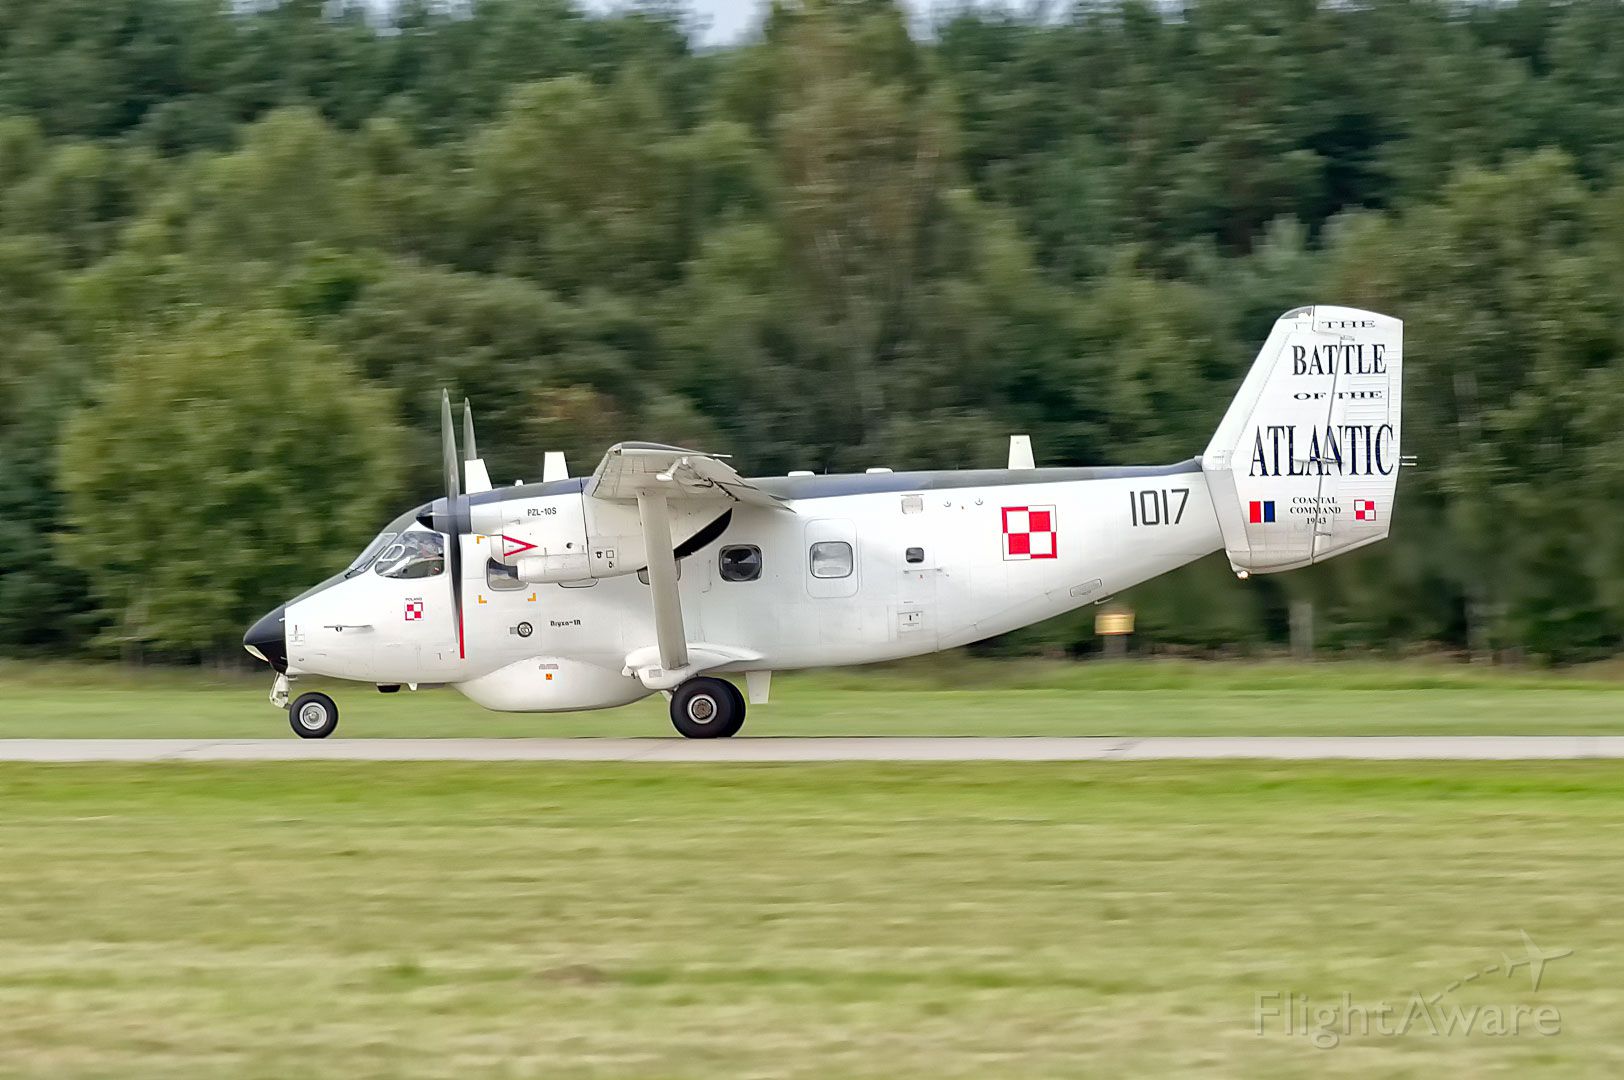 PZL-MIELEC Skytruck (N1017) - Shoot taken at Miroslawiec Airbase in Central Poland , september 2016. Plane M-28 "Bryza" is modernised AN-24 by Polish manufacturer PZL Mielec and American UTC. On this foto u will see the painting in tribute to the , 304 Polish Bombing RAF Squadron taking fights in the Battle of Atlantic and Channel La Manche Offensive during WW II. R.I.P. Polish Brave Pilots.